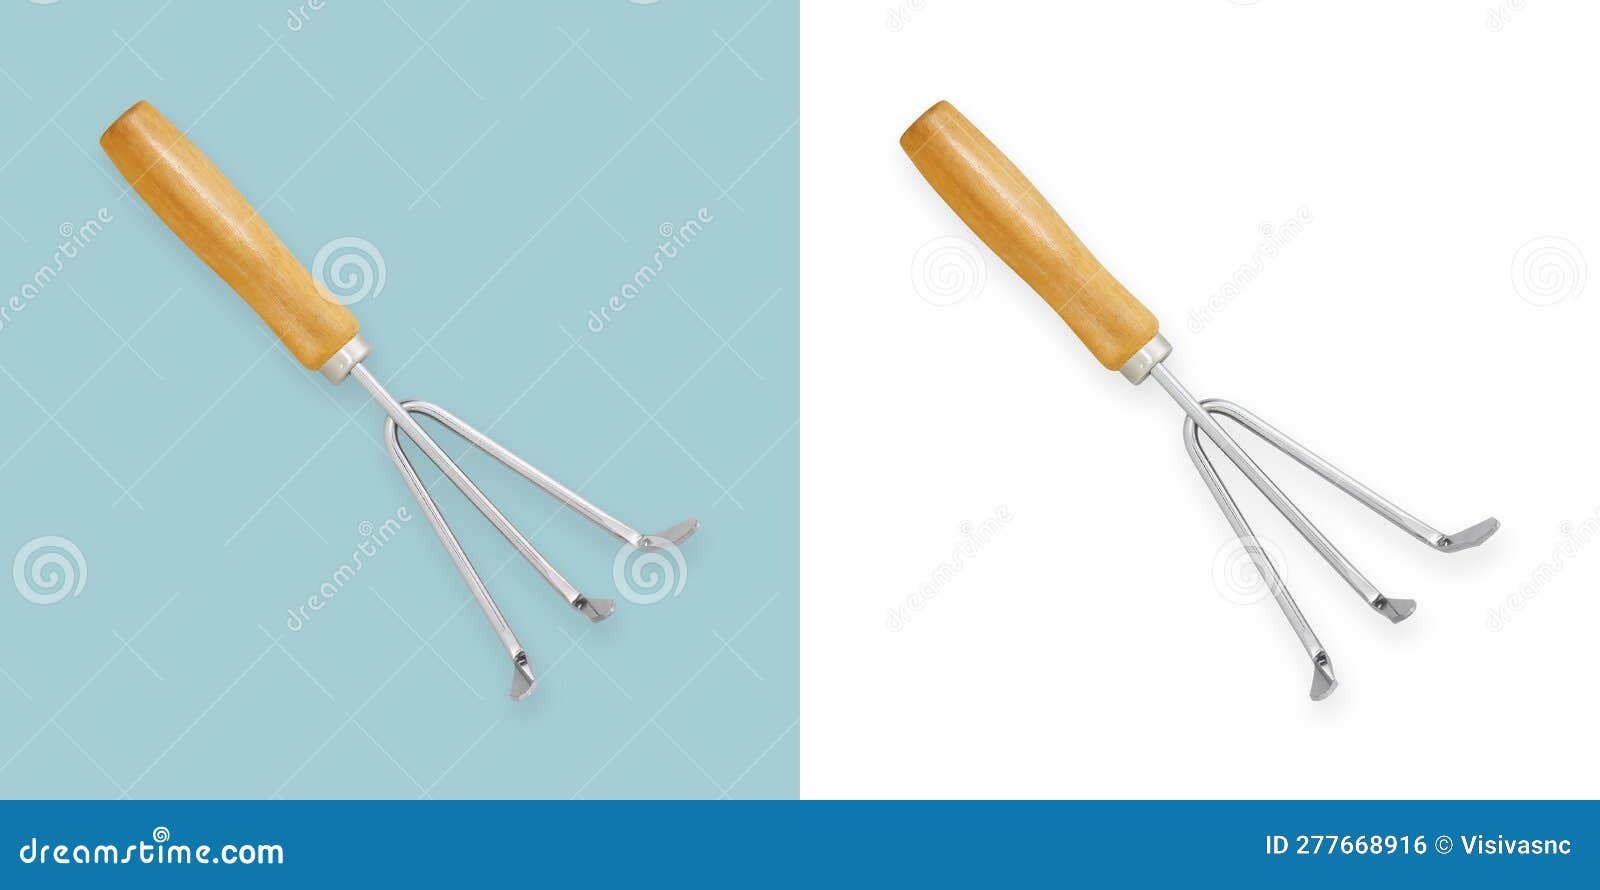 hand spud rake with wooden handle, weeding and turning soil, garden tool equipment  on white background for cultivating,